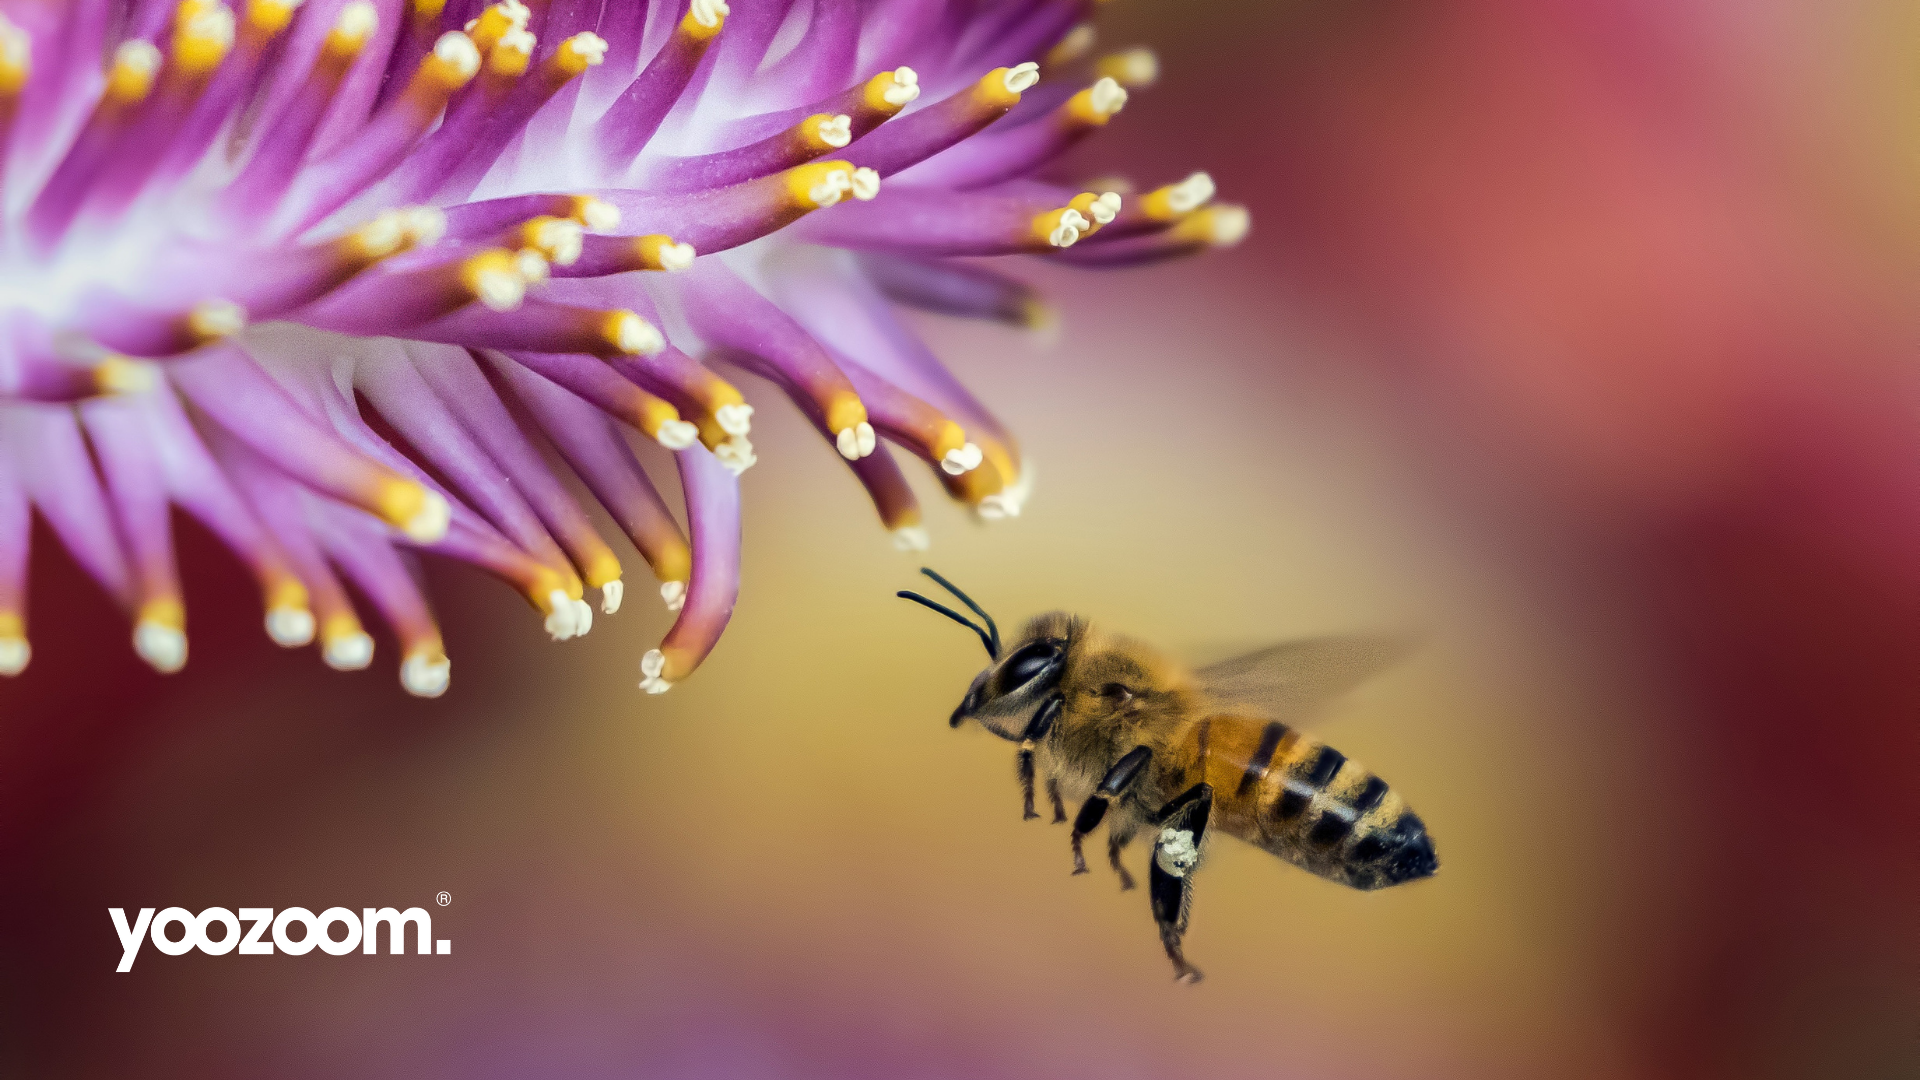 Unified communications: what can we learn from bees?